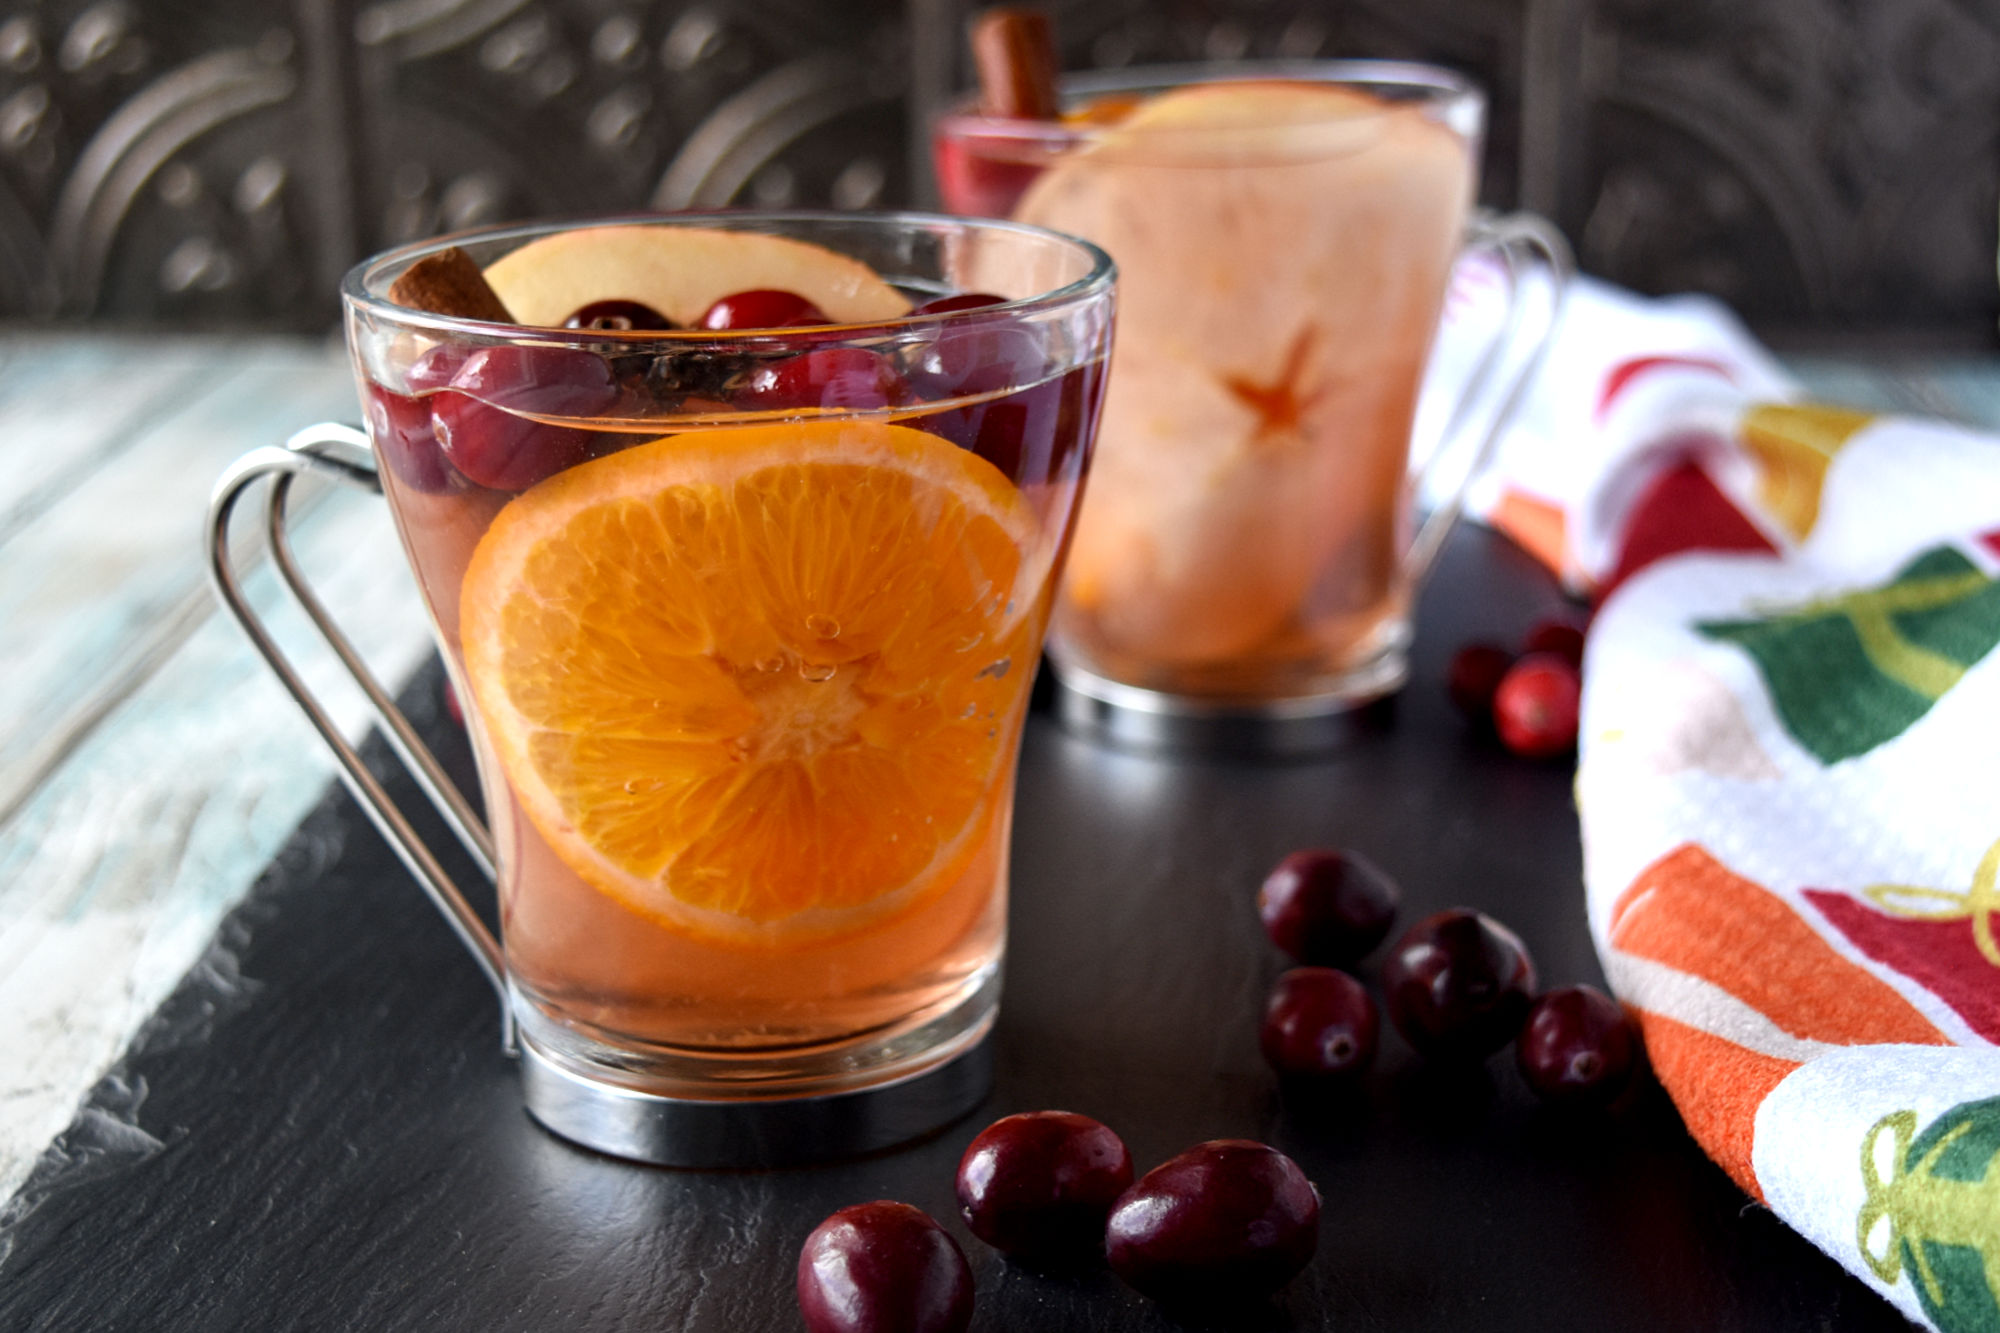 Looking to add a touch of elegance and flavor to your upcoming holiday gathering? This cranberry spiced sangria recipe will leave your guests begging for the recipe and asking for seconds. #CranberryWeek #sangria #wintersangria #spicedsangria #rosesangria
